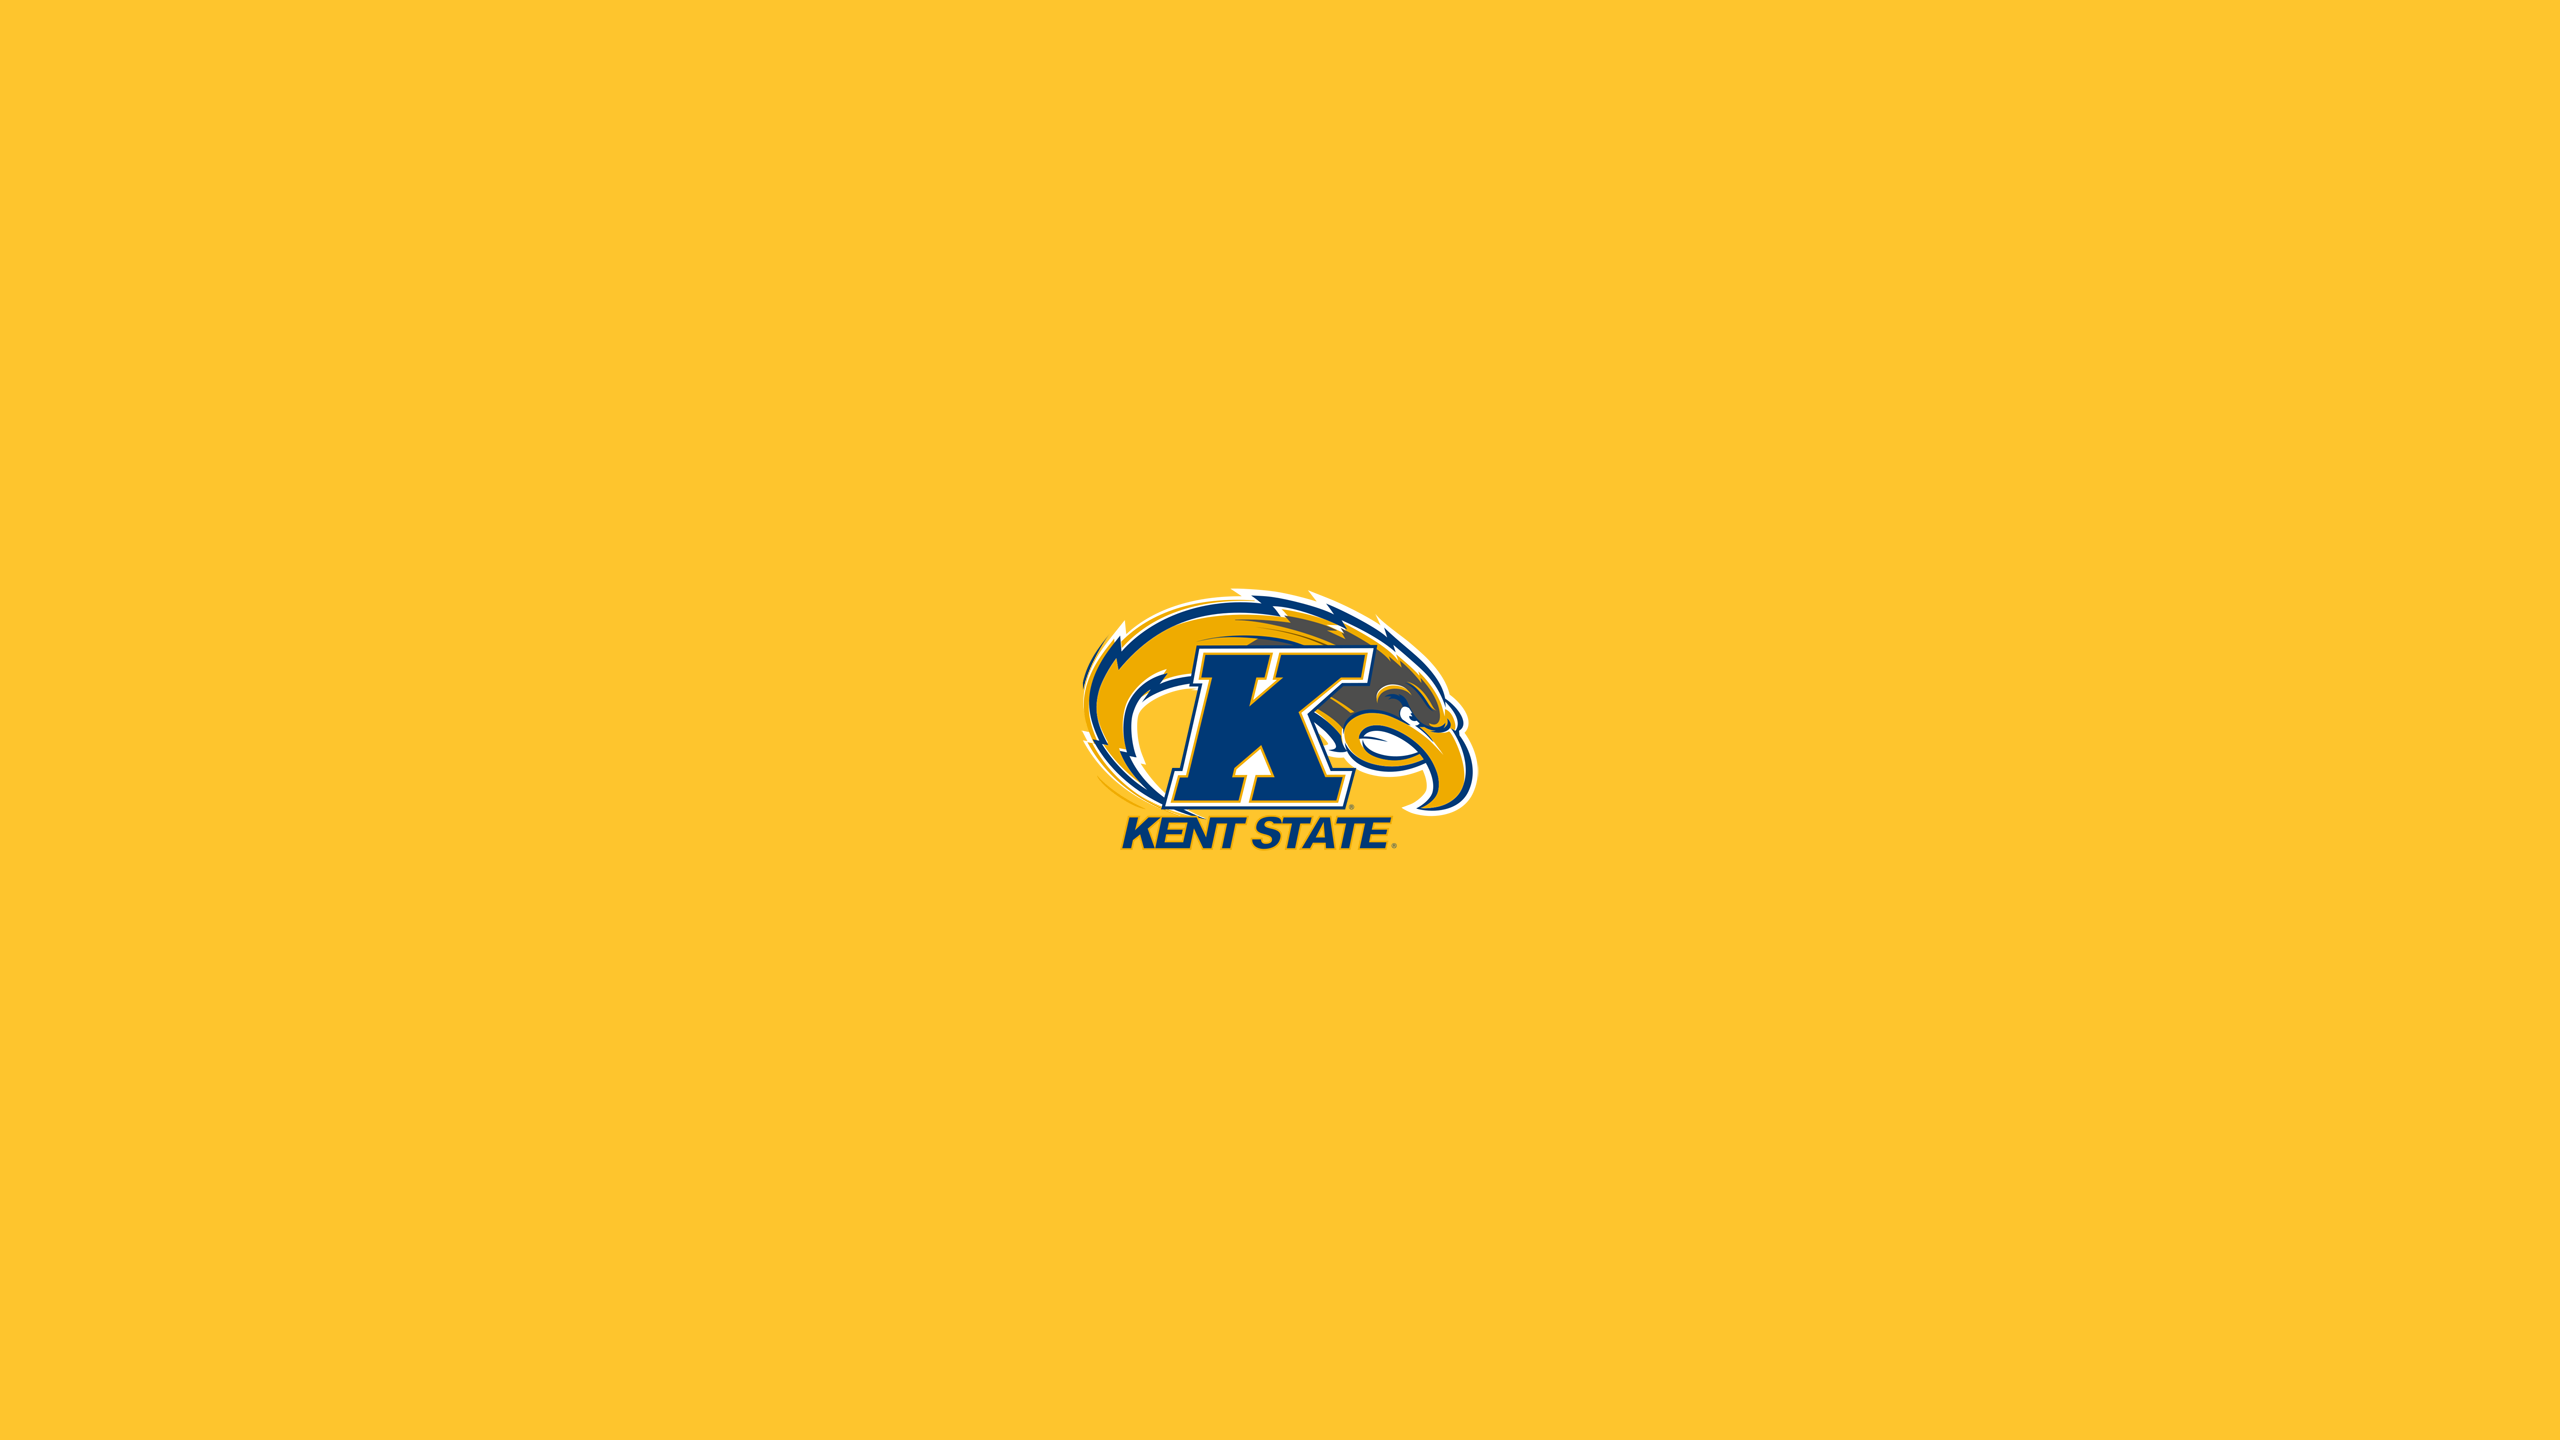 Kent State Golden Flashes Football - NCAAF - Square Bettor